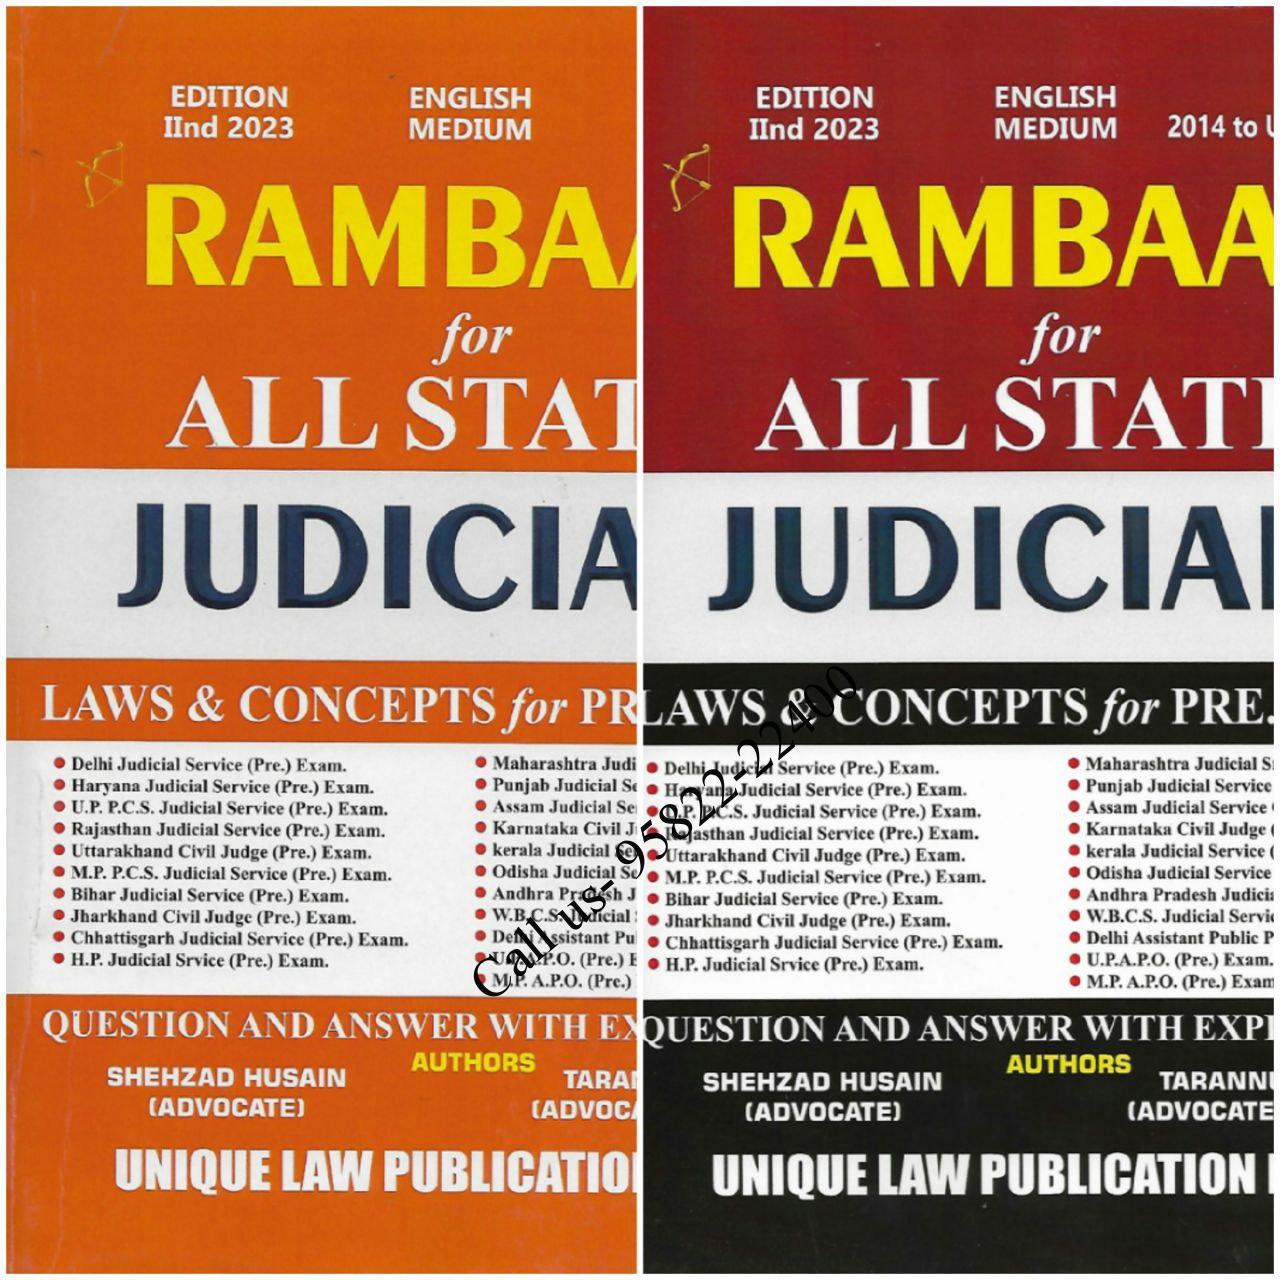 Unique's Rambaan Set of 2 Books for ALL States Judiciary [Law and Concept for Prelims Exam]